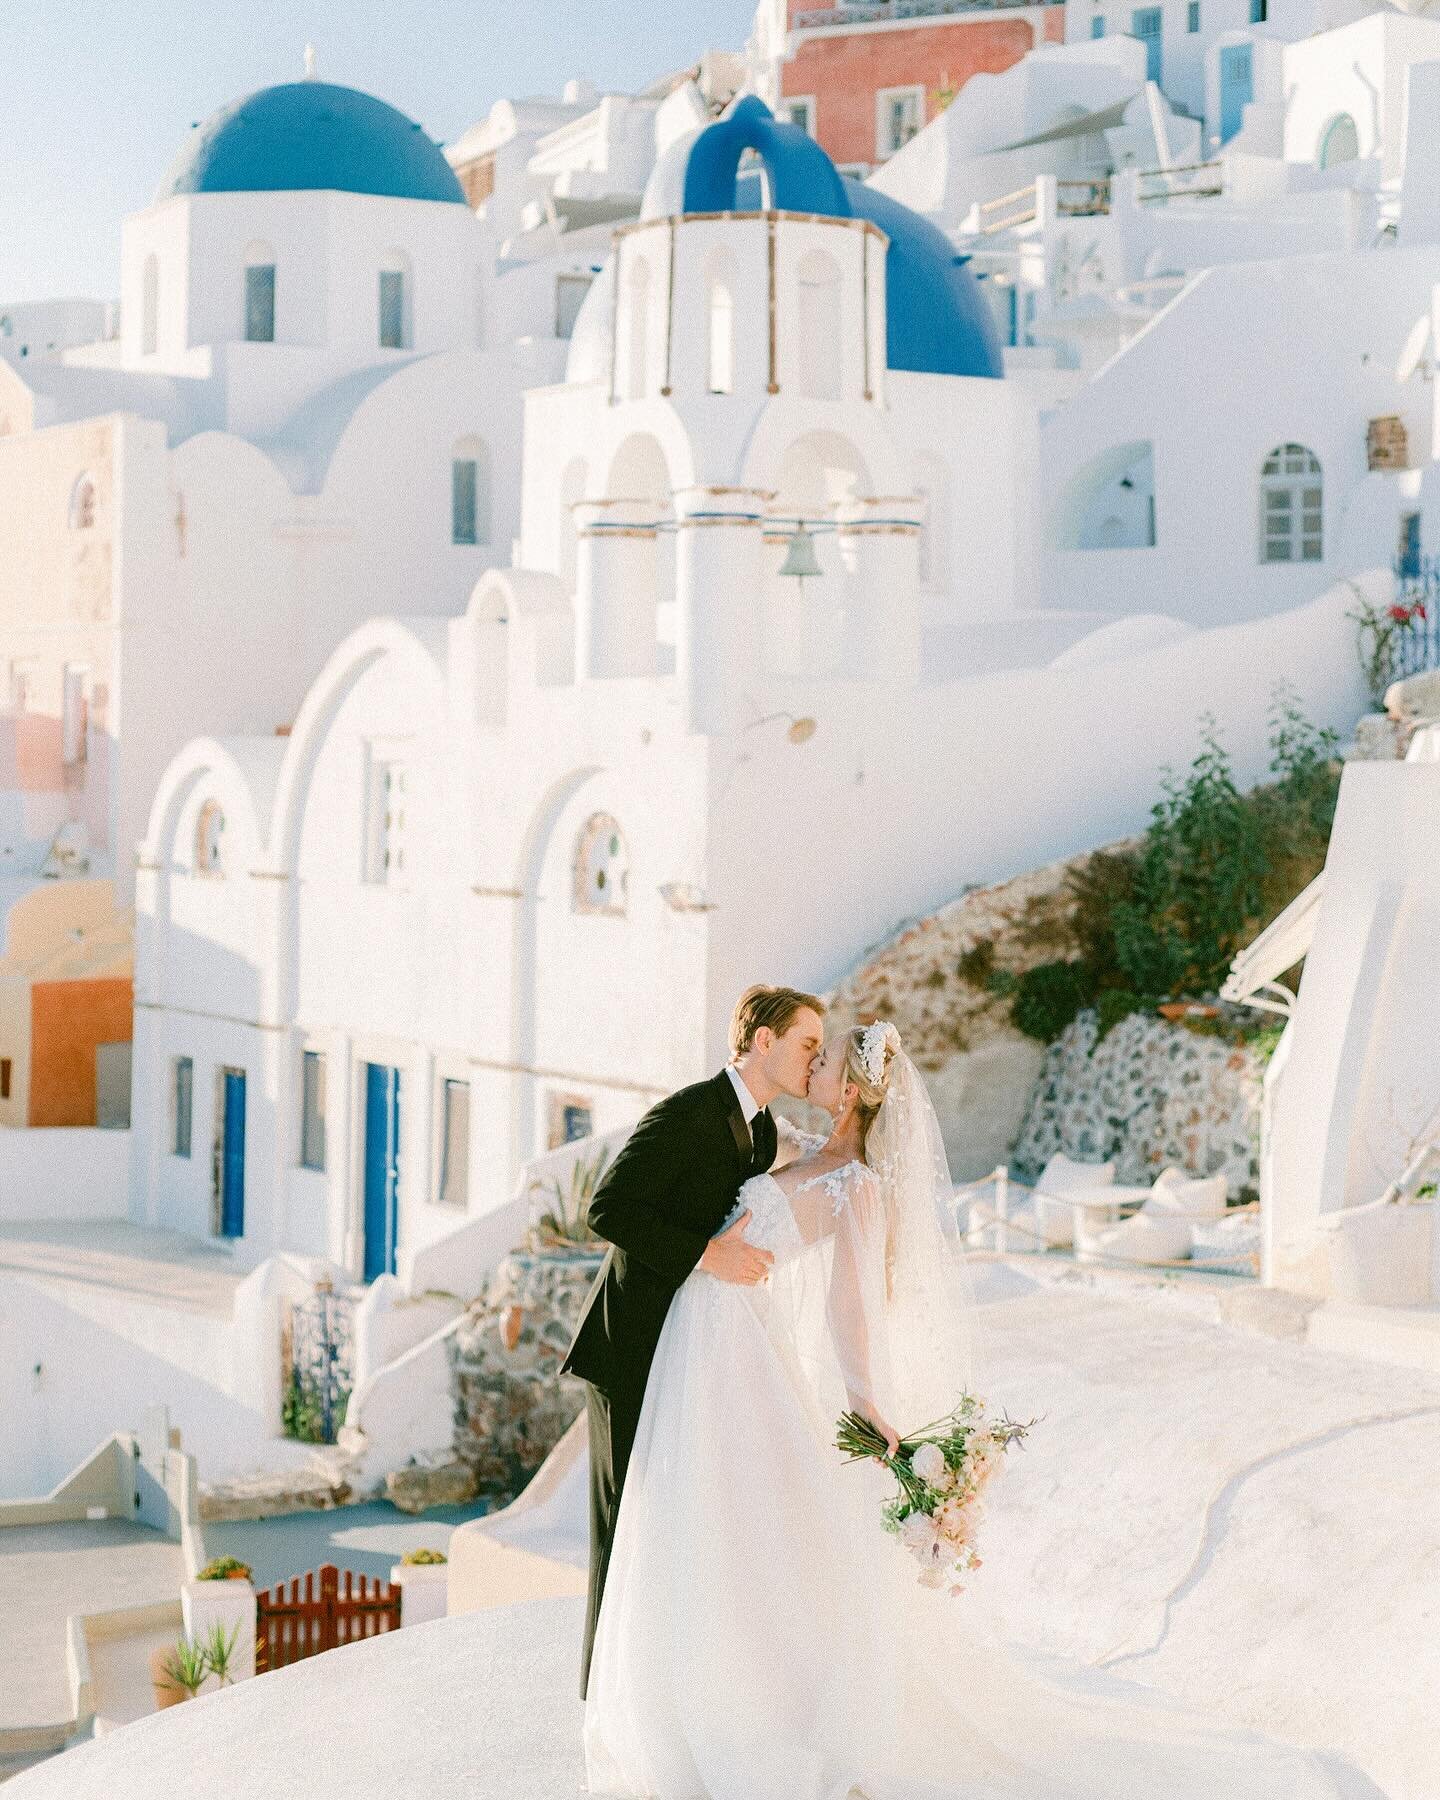 So excited to say that this beautiful Oia Wedding is featured on @bajanwed. 
Check it out! Link in bio
.
.
.
Photographer: @elizabethhuntphotography 
Wedding Planner, Styling &amp; Design: AMV Weddings @amv_weddings
Florist: Maria Voudouri @mariavoud